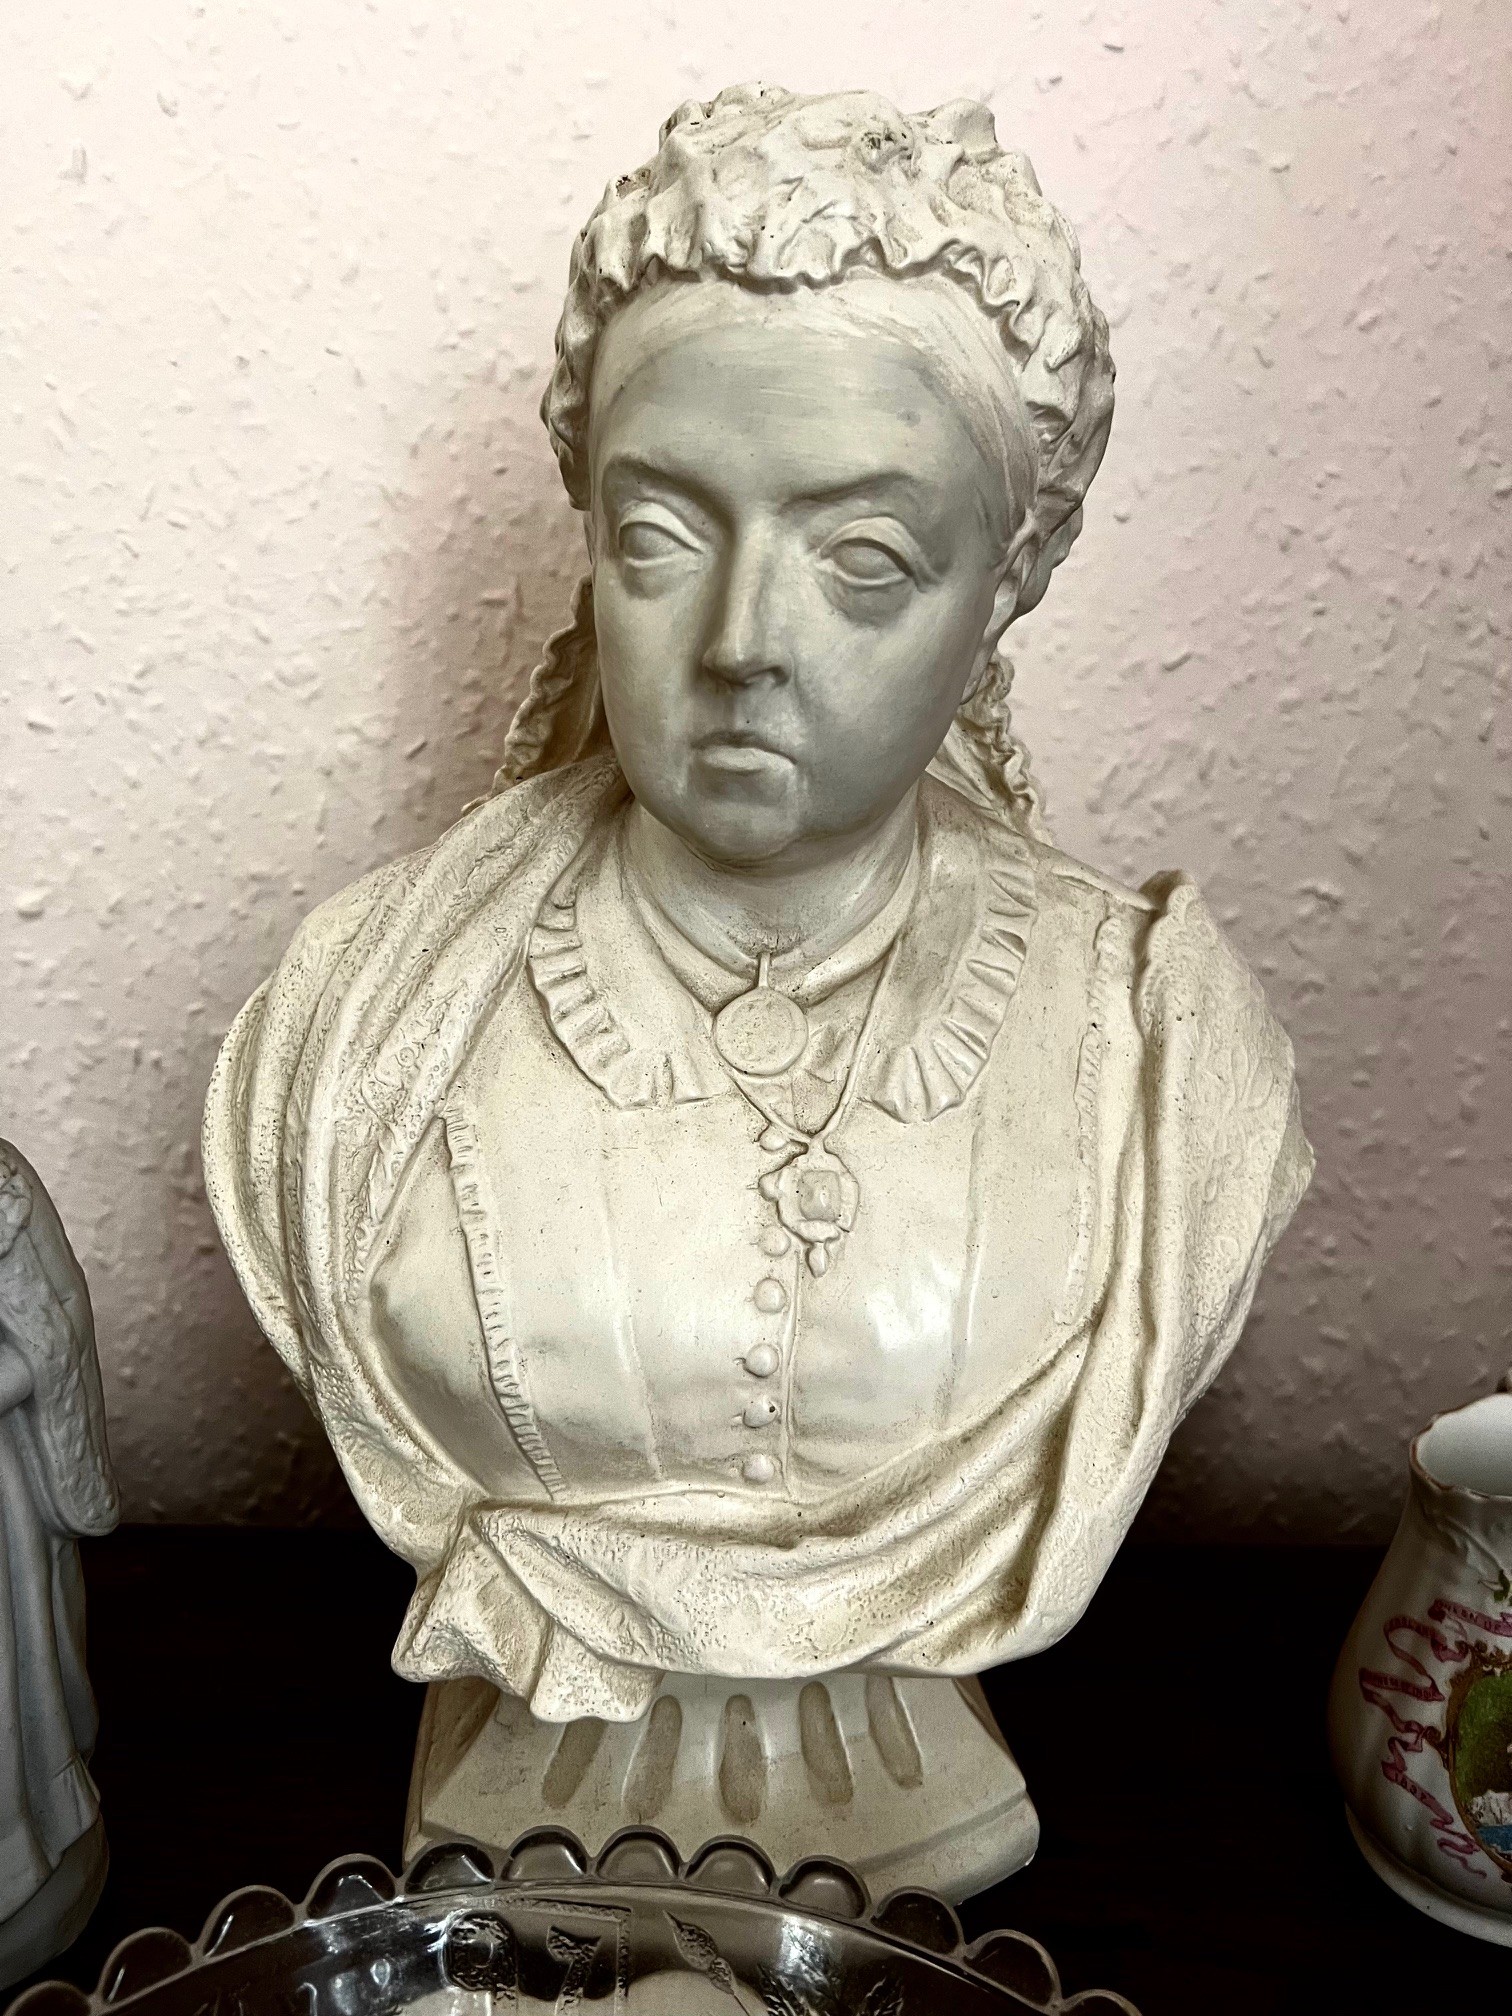 BUST OF QUEEN VICTORIA AND OTHER MEMORABILIA, MOULDED GLASS DISHES, ETC - Image 3 of 4